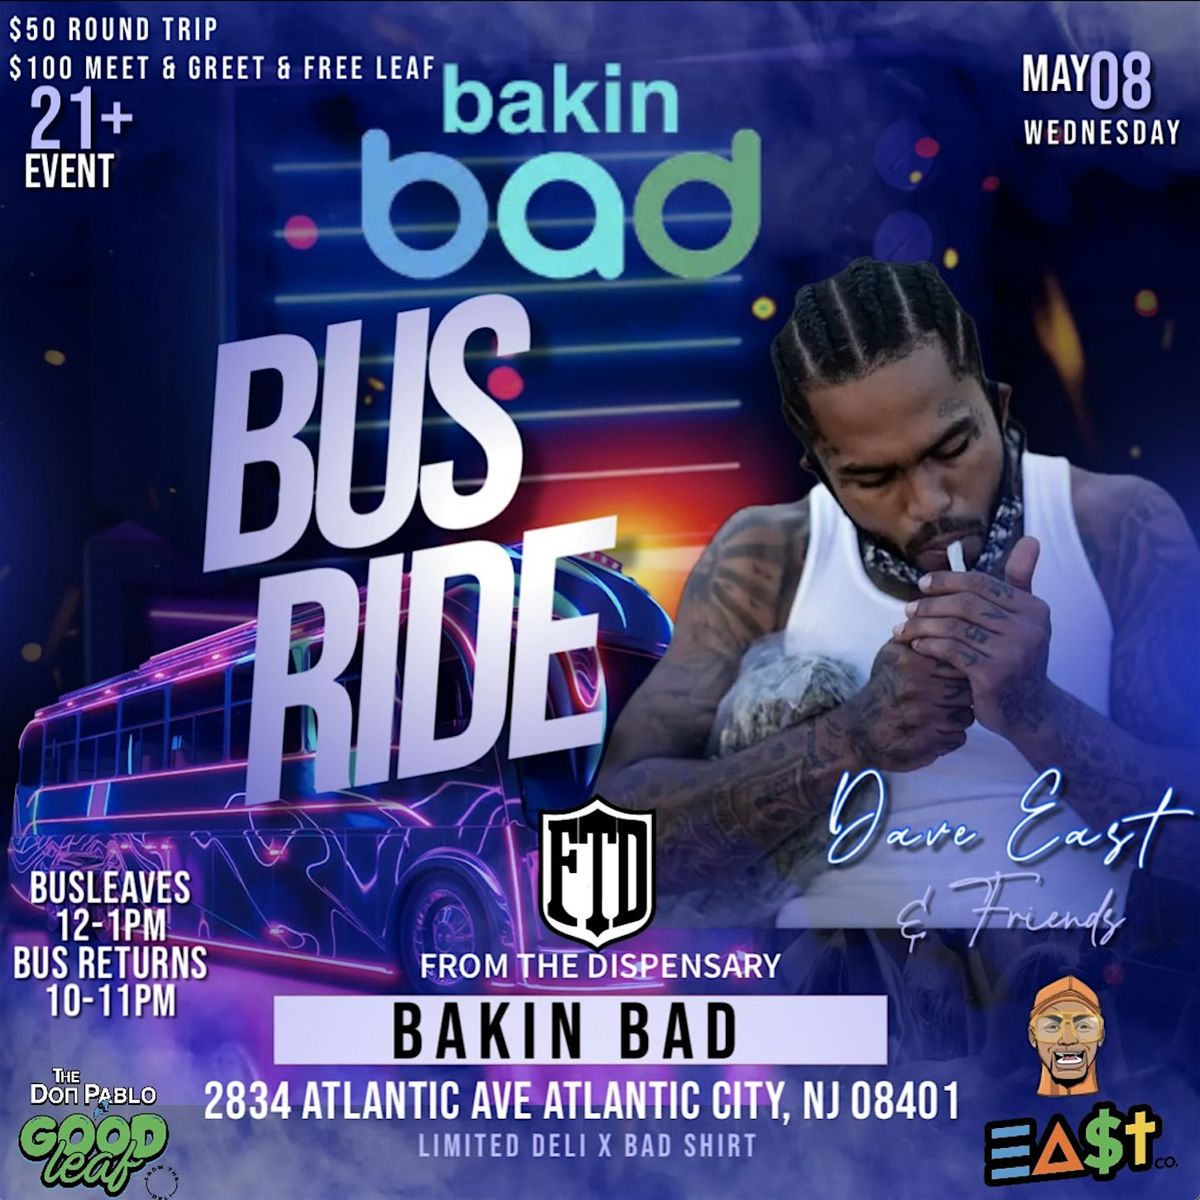 BAKIN BAD x FROM THE DISPENSARY  5\/8 BUS RIDE FEAT. DAVE EAST & FRIENDS